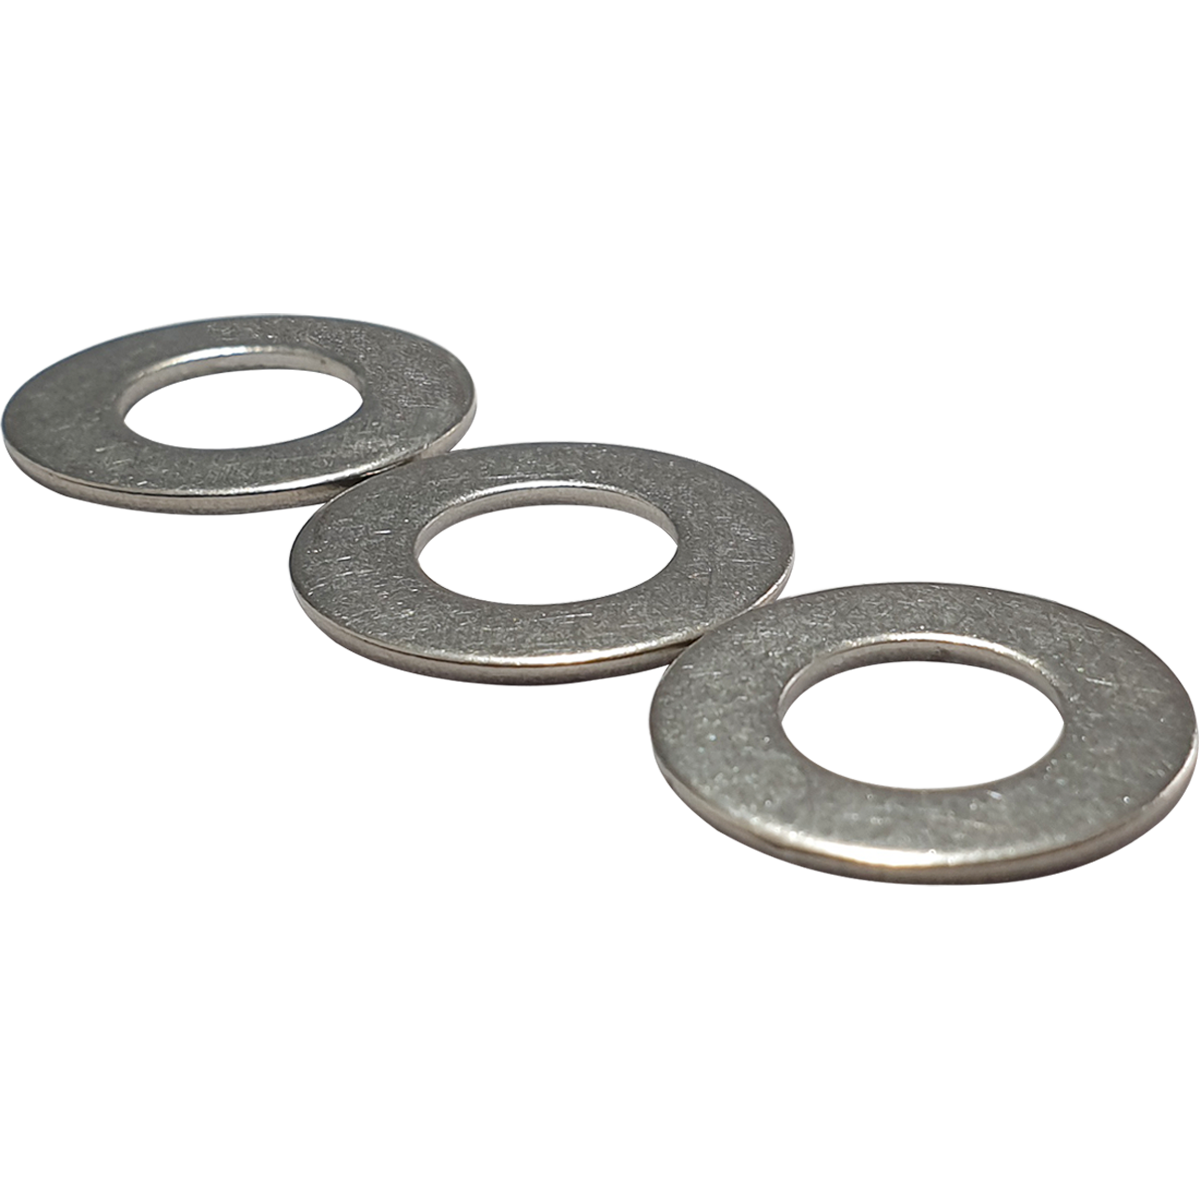 Form B flat washer in a variety of sizes and materials.